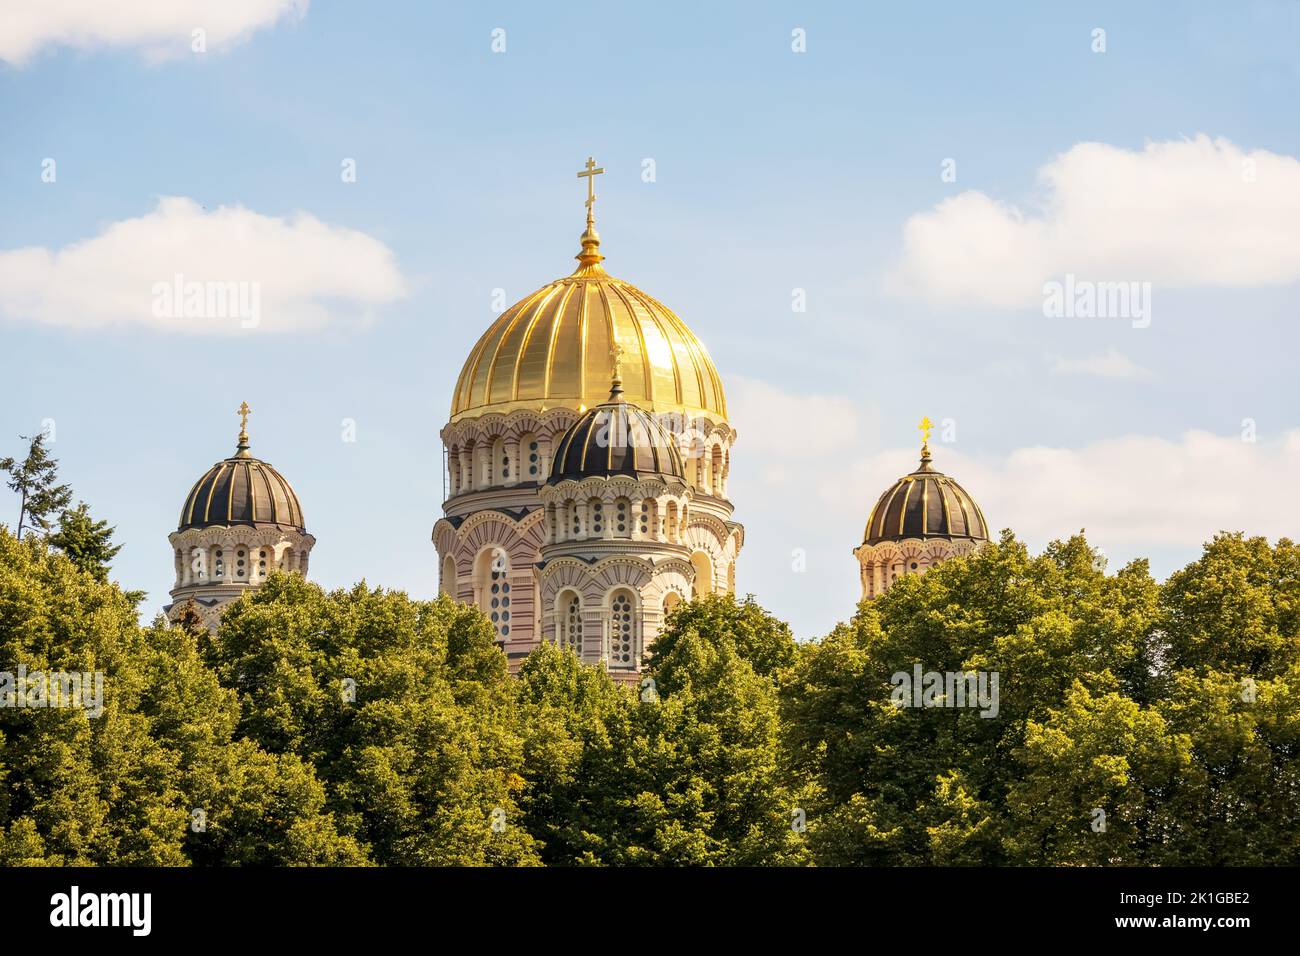 A church with a yellow wall and a pointed golden tip in the middle of the city center with multiple windows and trees next to it Stock Photo